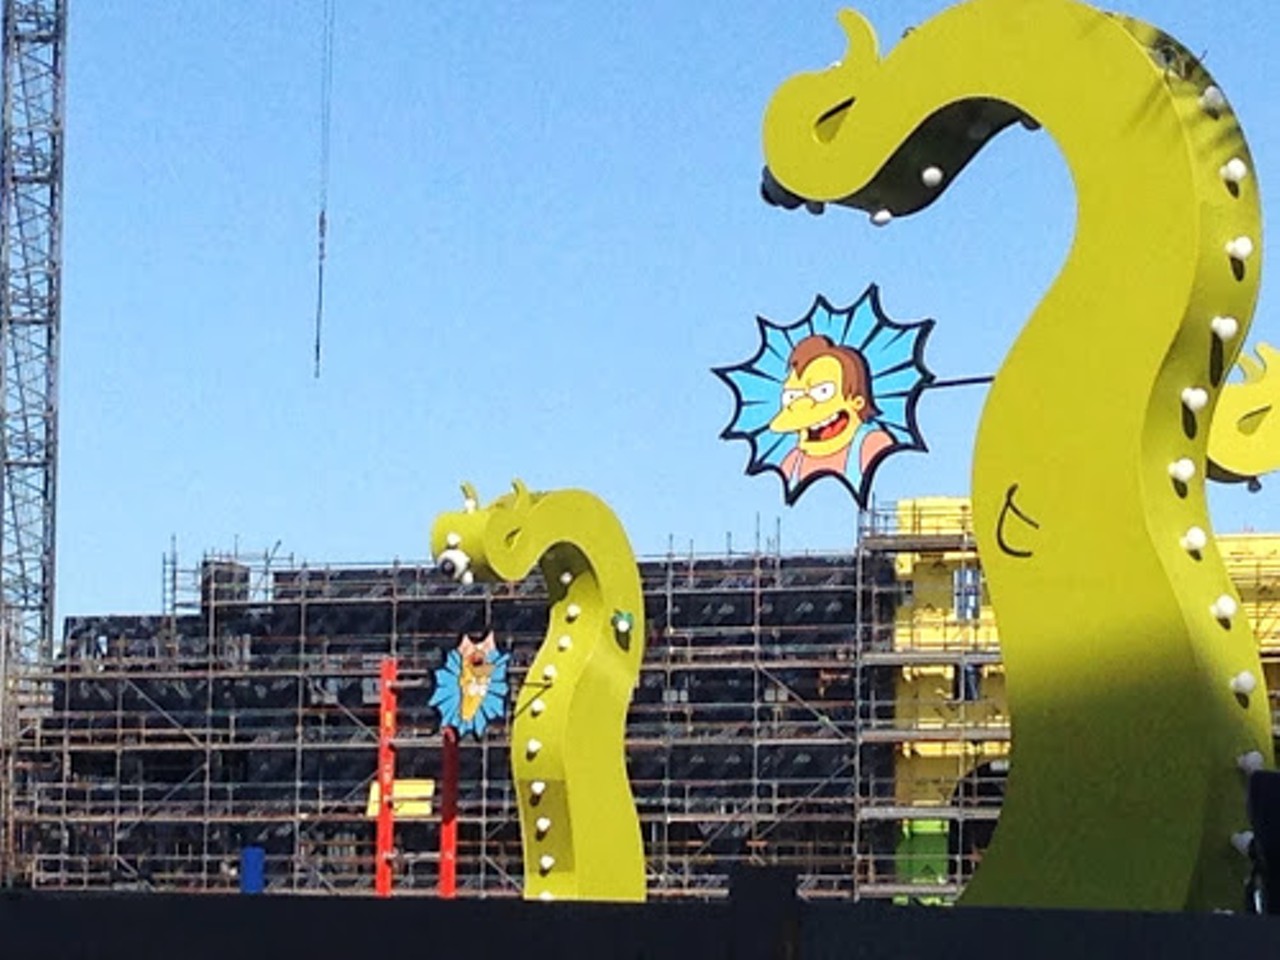 You can see spinning character targets for the soon-to-open Kang & Kodos' interactive features are being installed.